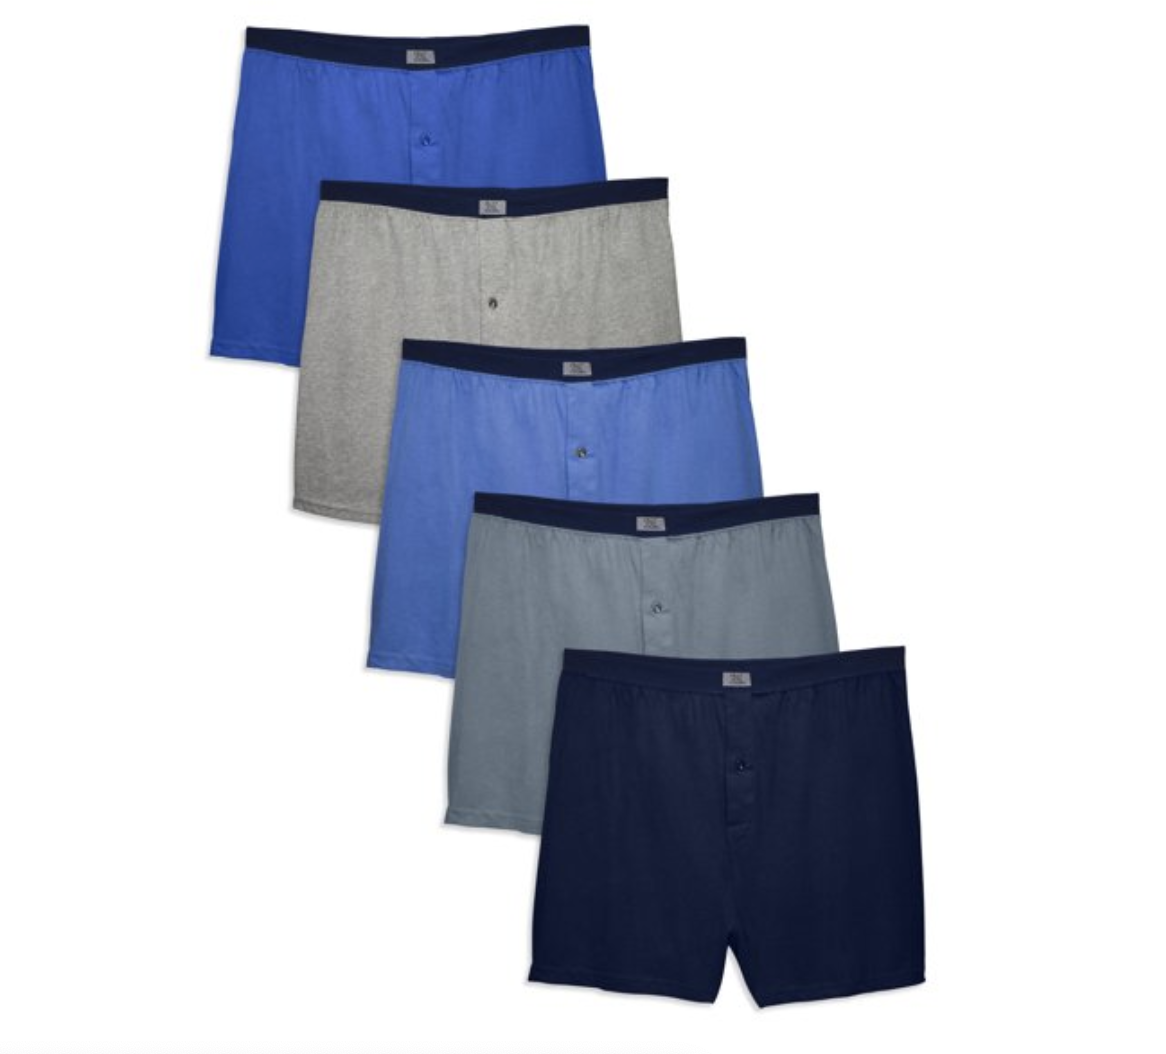 5 Pack L Men's Assorted Knit Boxers, L (Fruit of the Loom )